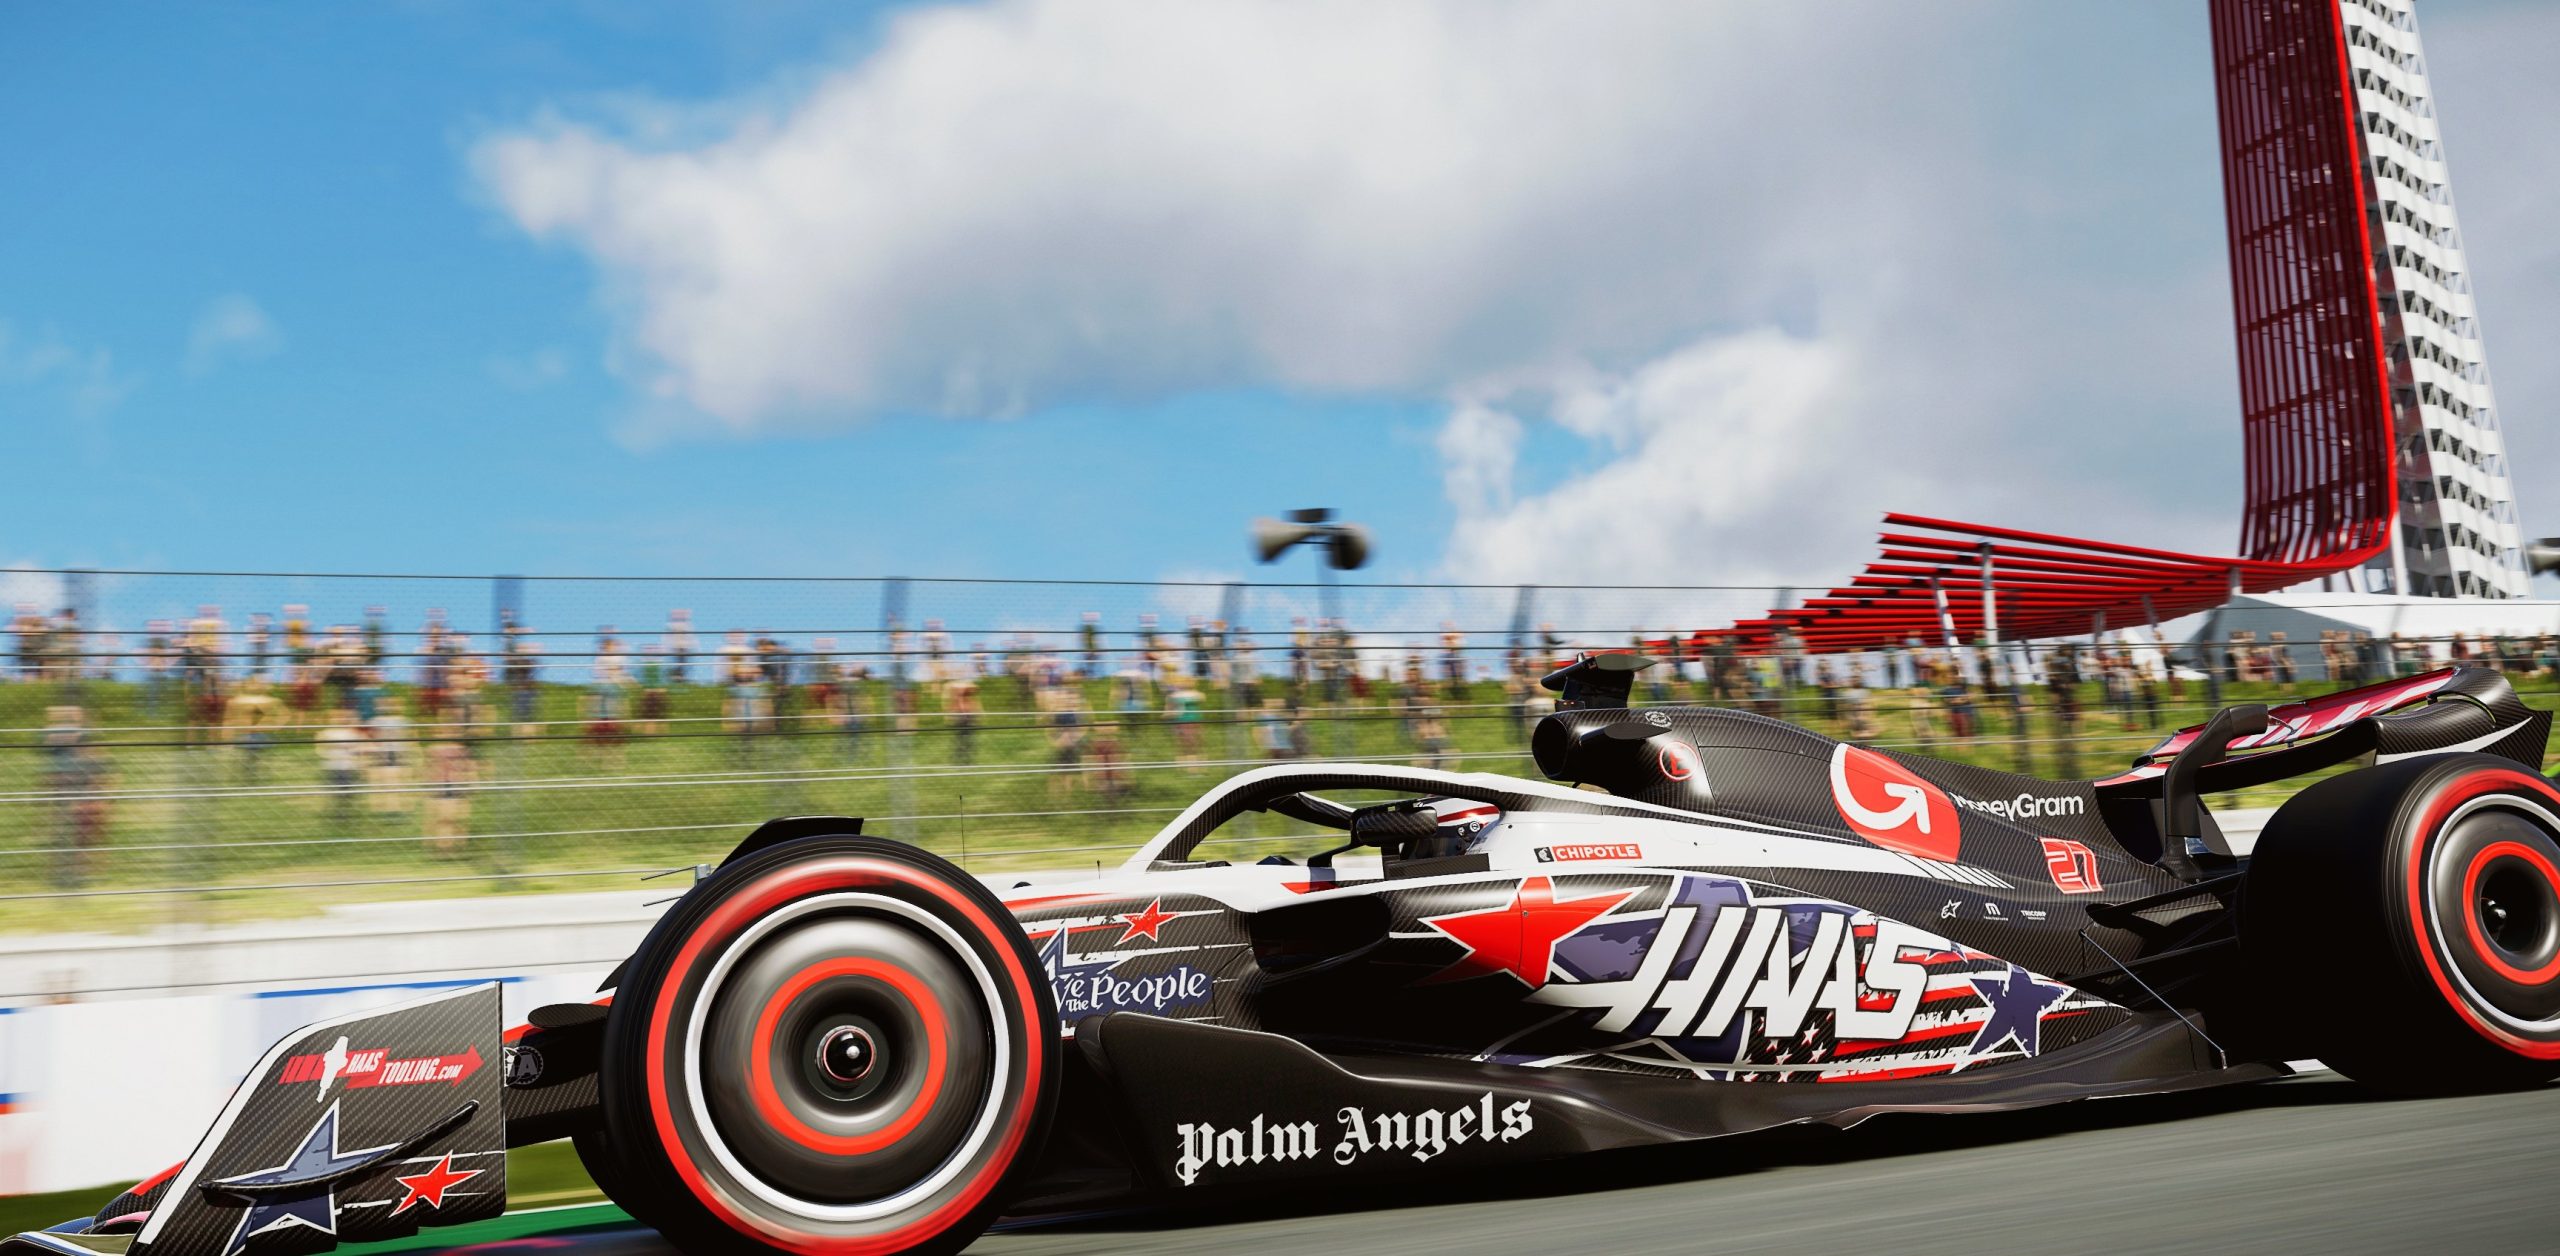 Haas with new livery for Austin